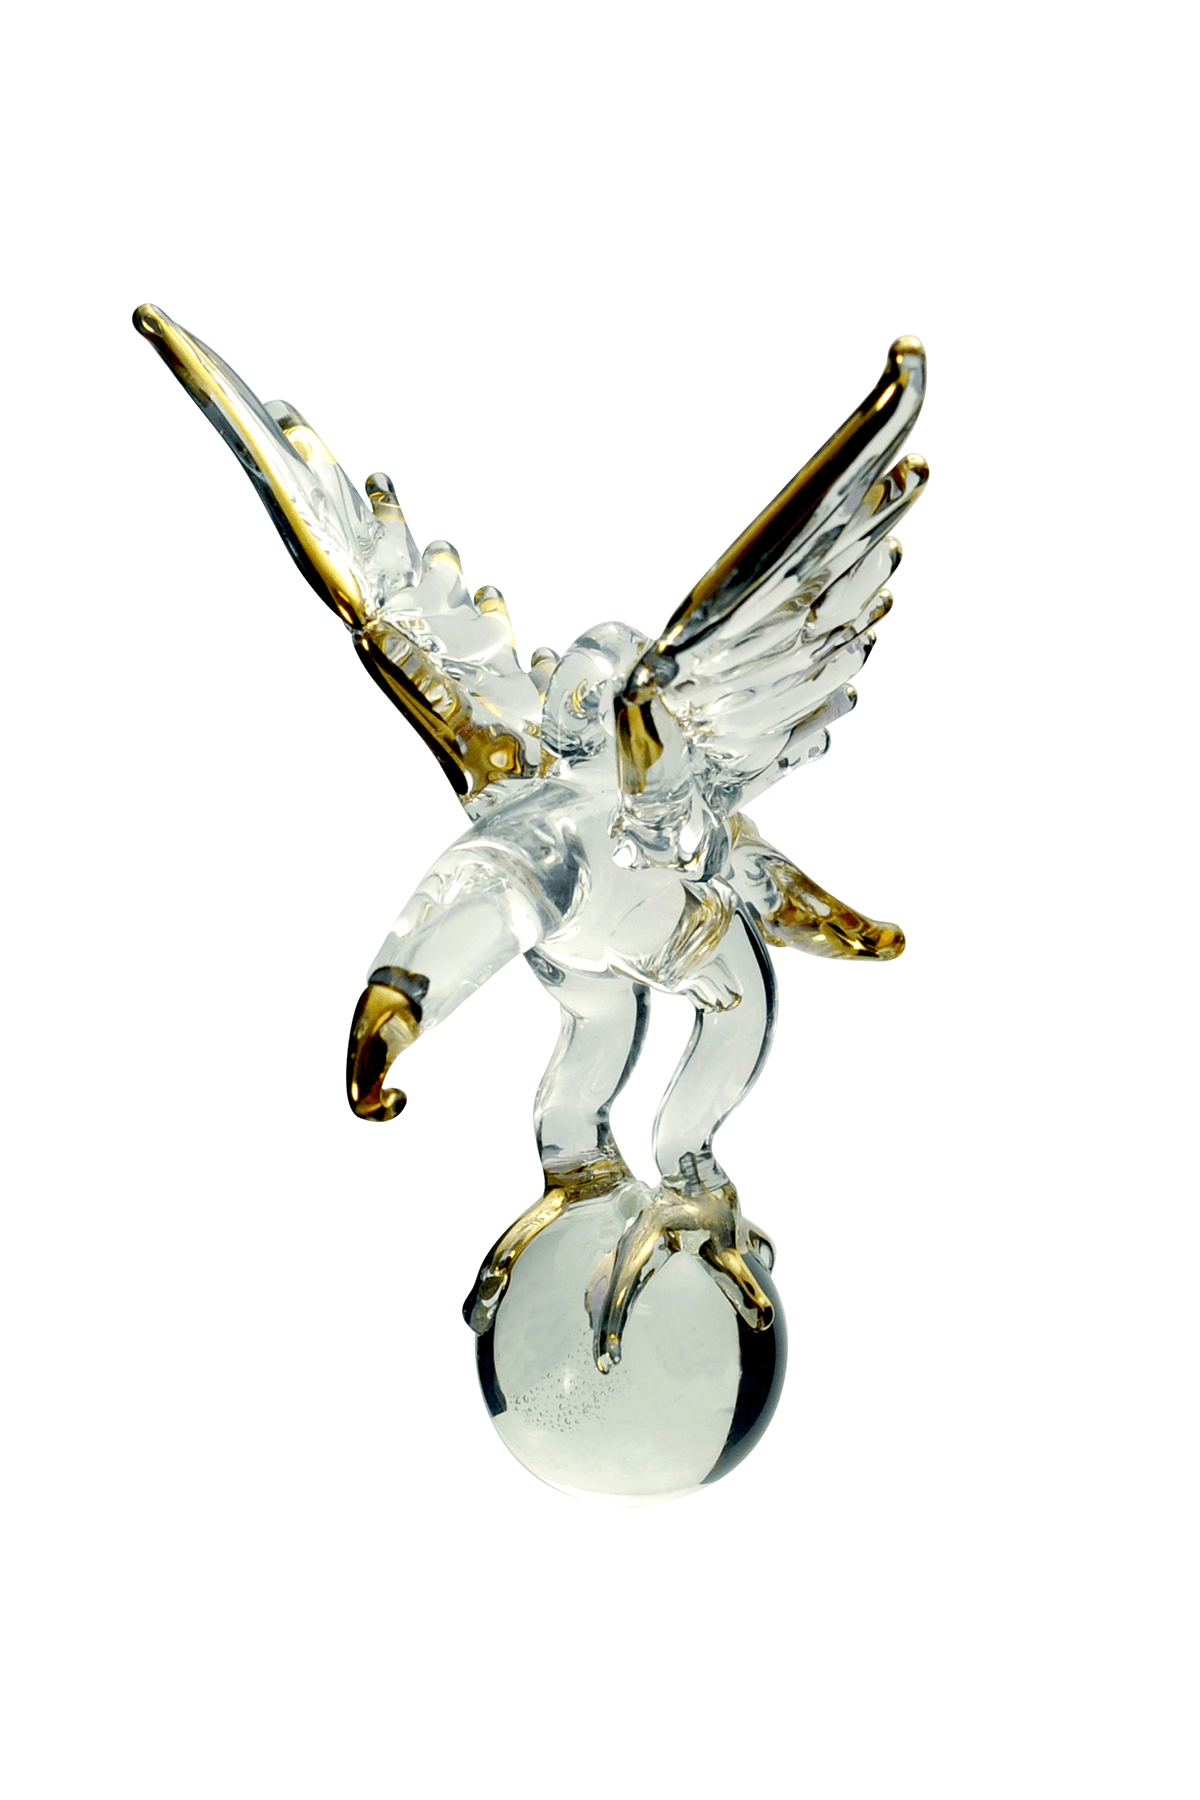 Crystal Castle Glass Eagle with gold trim details on beak, wings and tail. on a crystal ball. Front View.